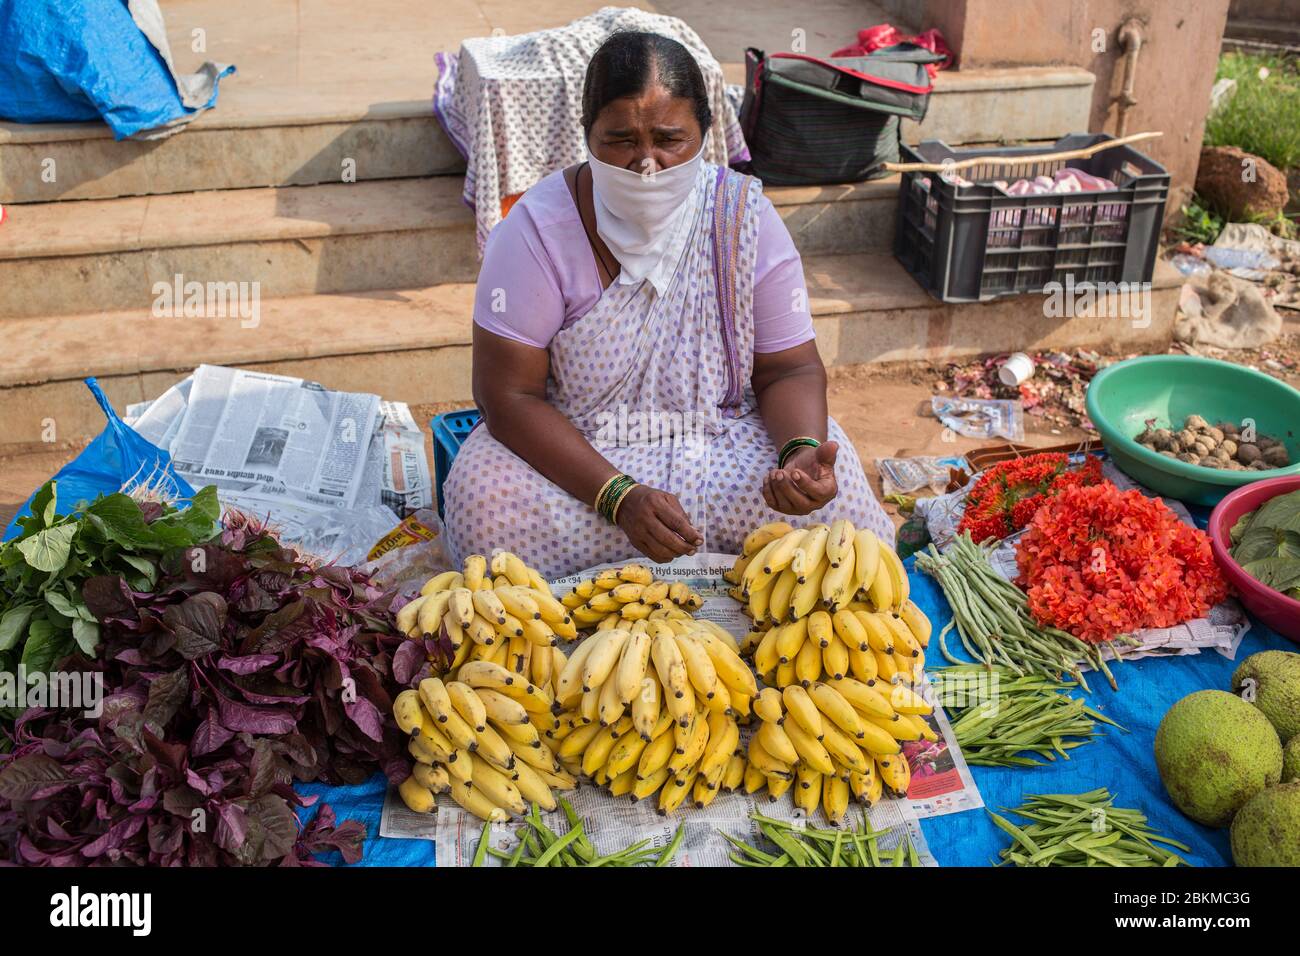 Woman selling fruits and vegetables in the covid-19 lockdown in India Stock Photo